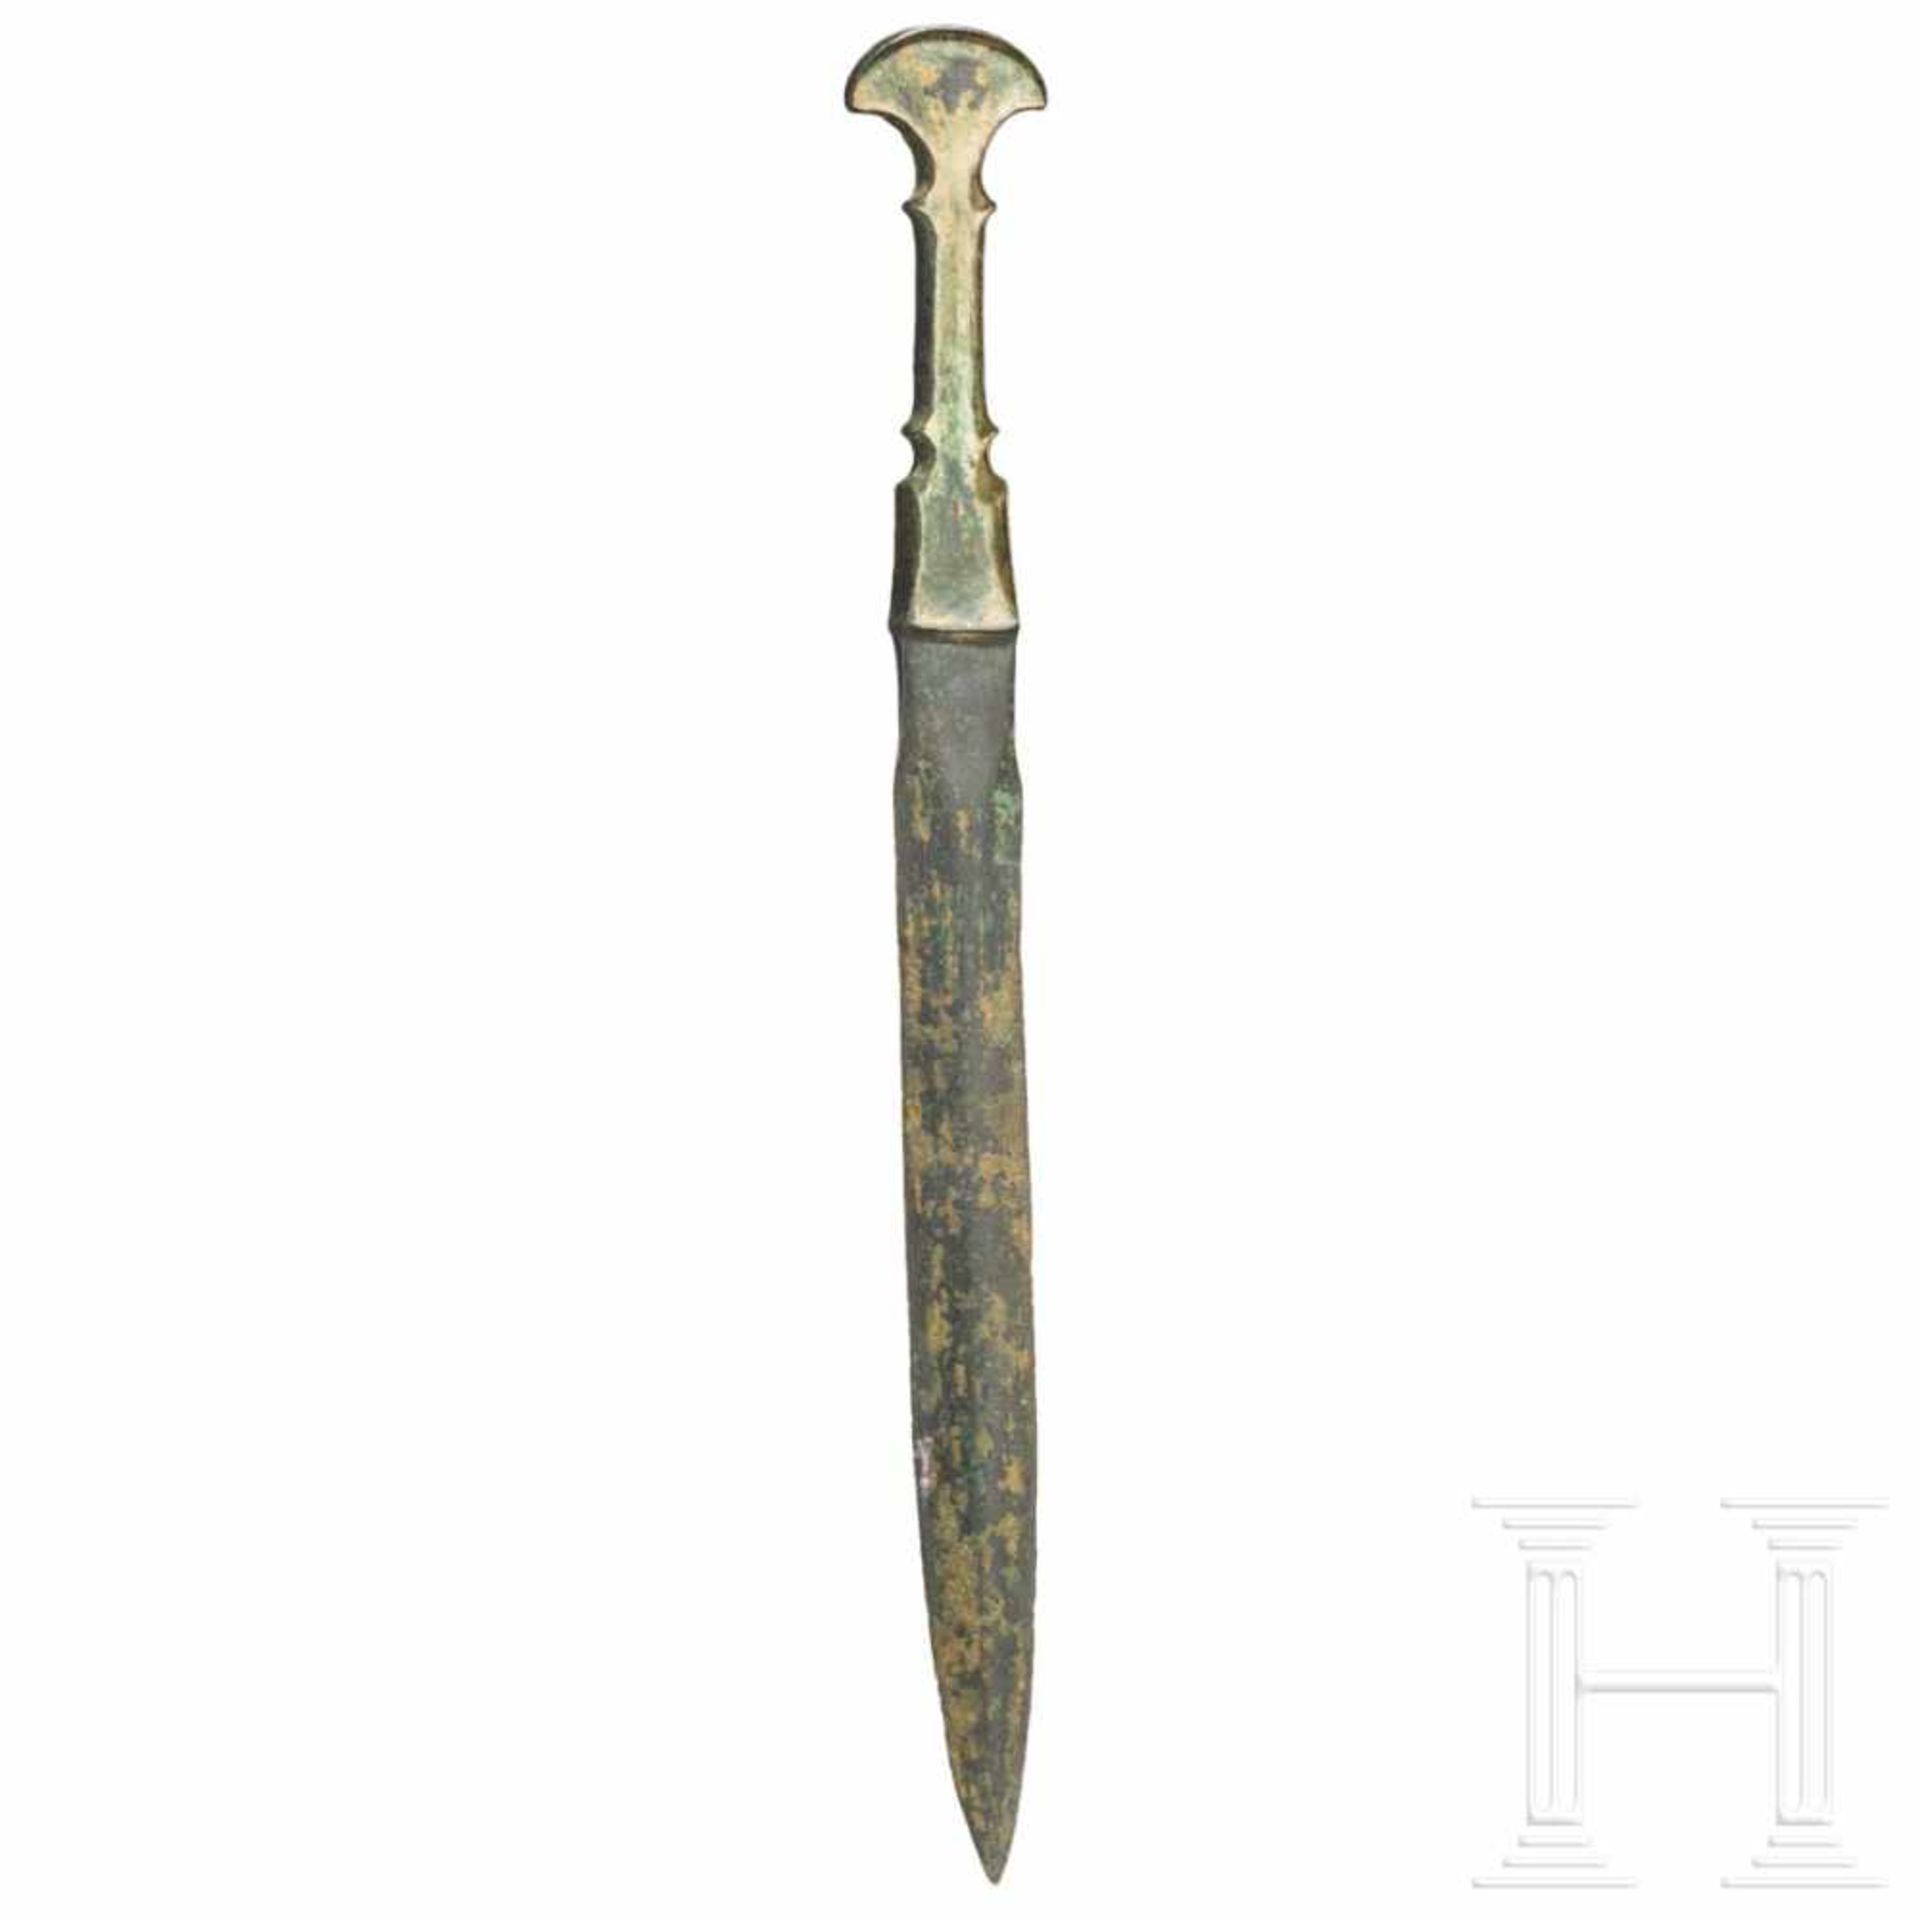 An excellently preserved Luristan dagger, 11th century B.C.A Luristan dagger with excellently